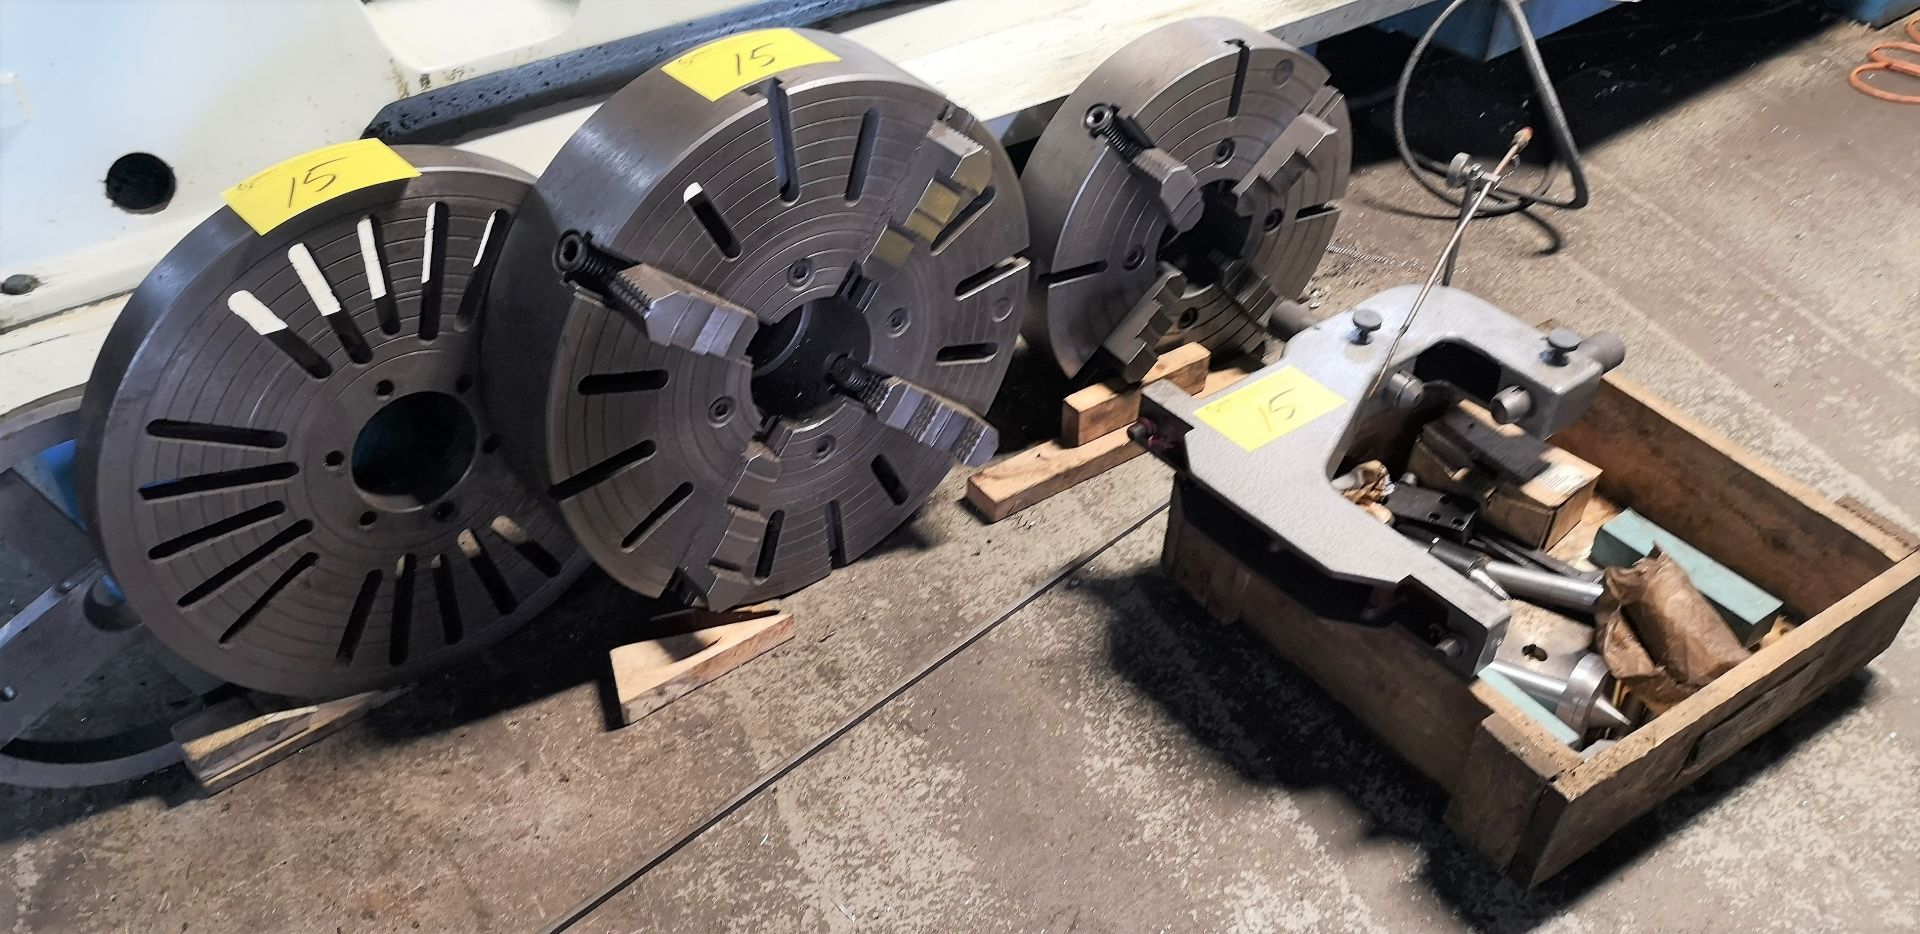 TOS SN71C Lathe, 28” x 120”, Mitutoyo 2-Axis DRO, 16” 3-Jaw Chuck, 3” Bore, Speeds to 1,000 RPM, - Image 14 of 15